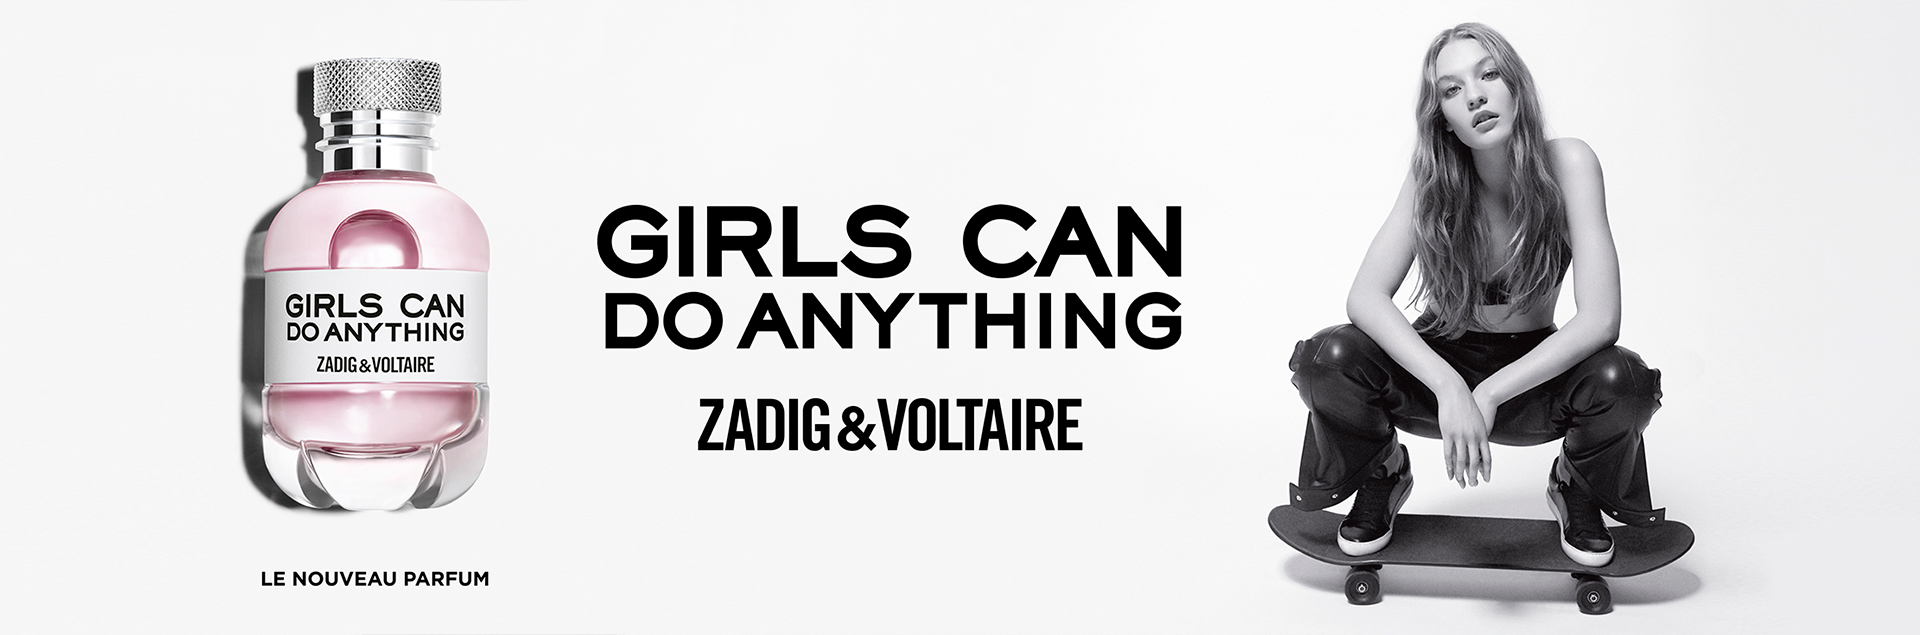 GIRLS CAN DO ANYTHING